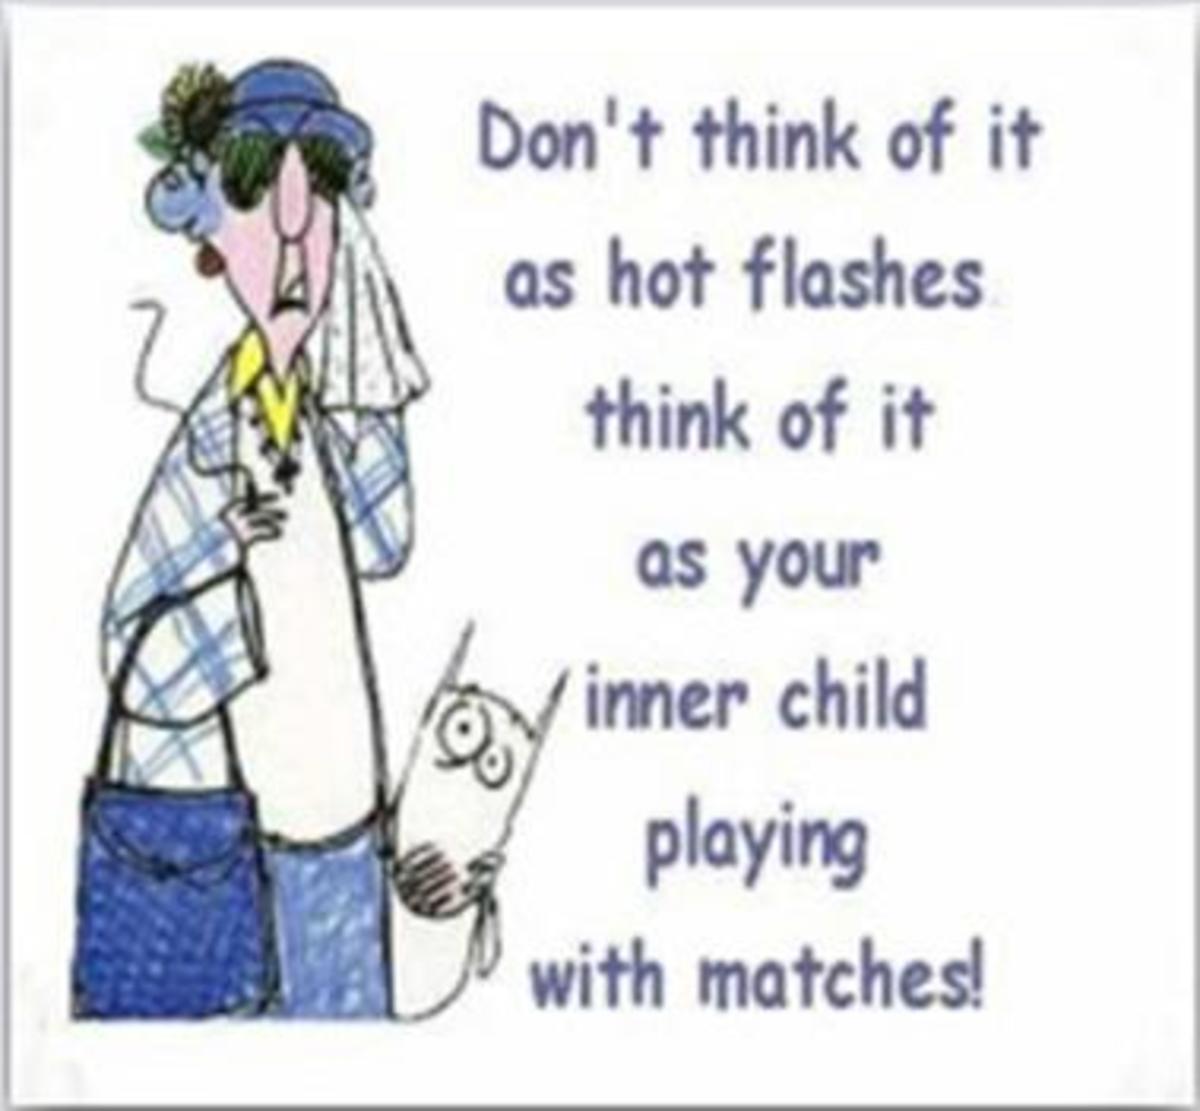 Stop Hot Flashes - Hot Flushes - And Night Sweats Fast - Without Using HRT